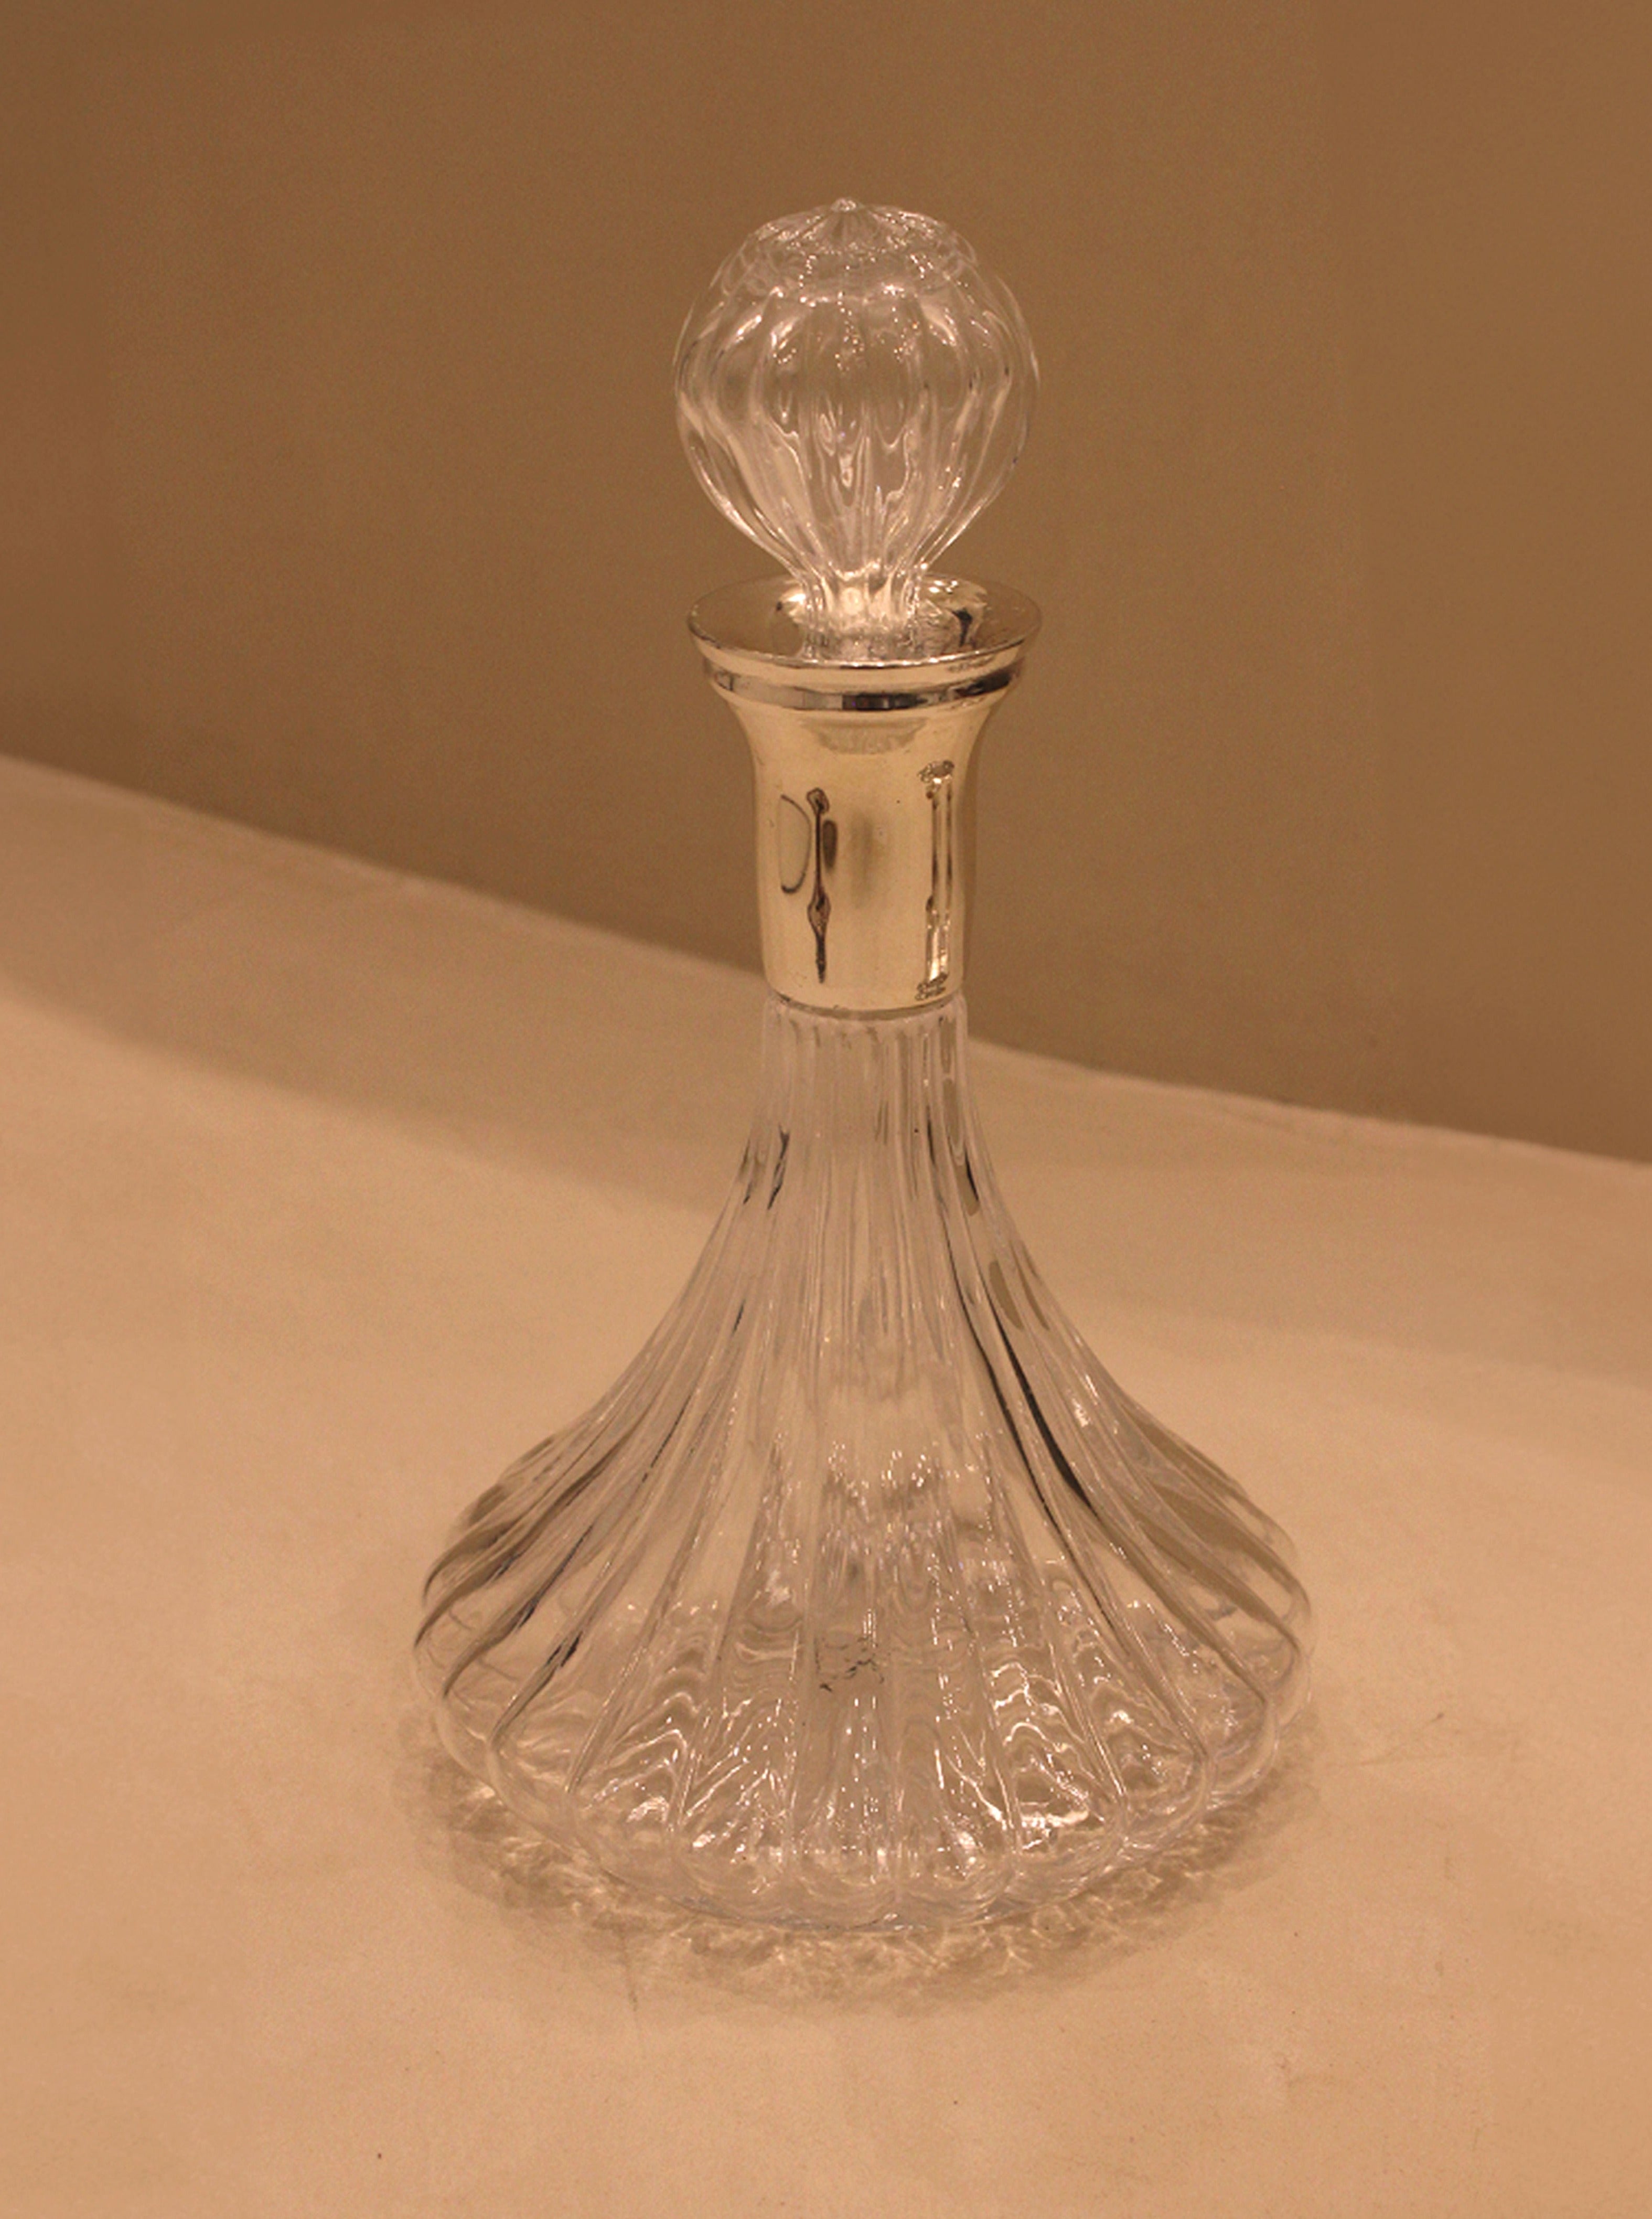 A Maison Collectible clear glass carafe with an elegant fluted base and a rounded stopper, displayed on a beige surface under warm lighting.